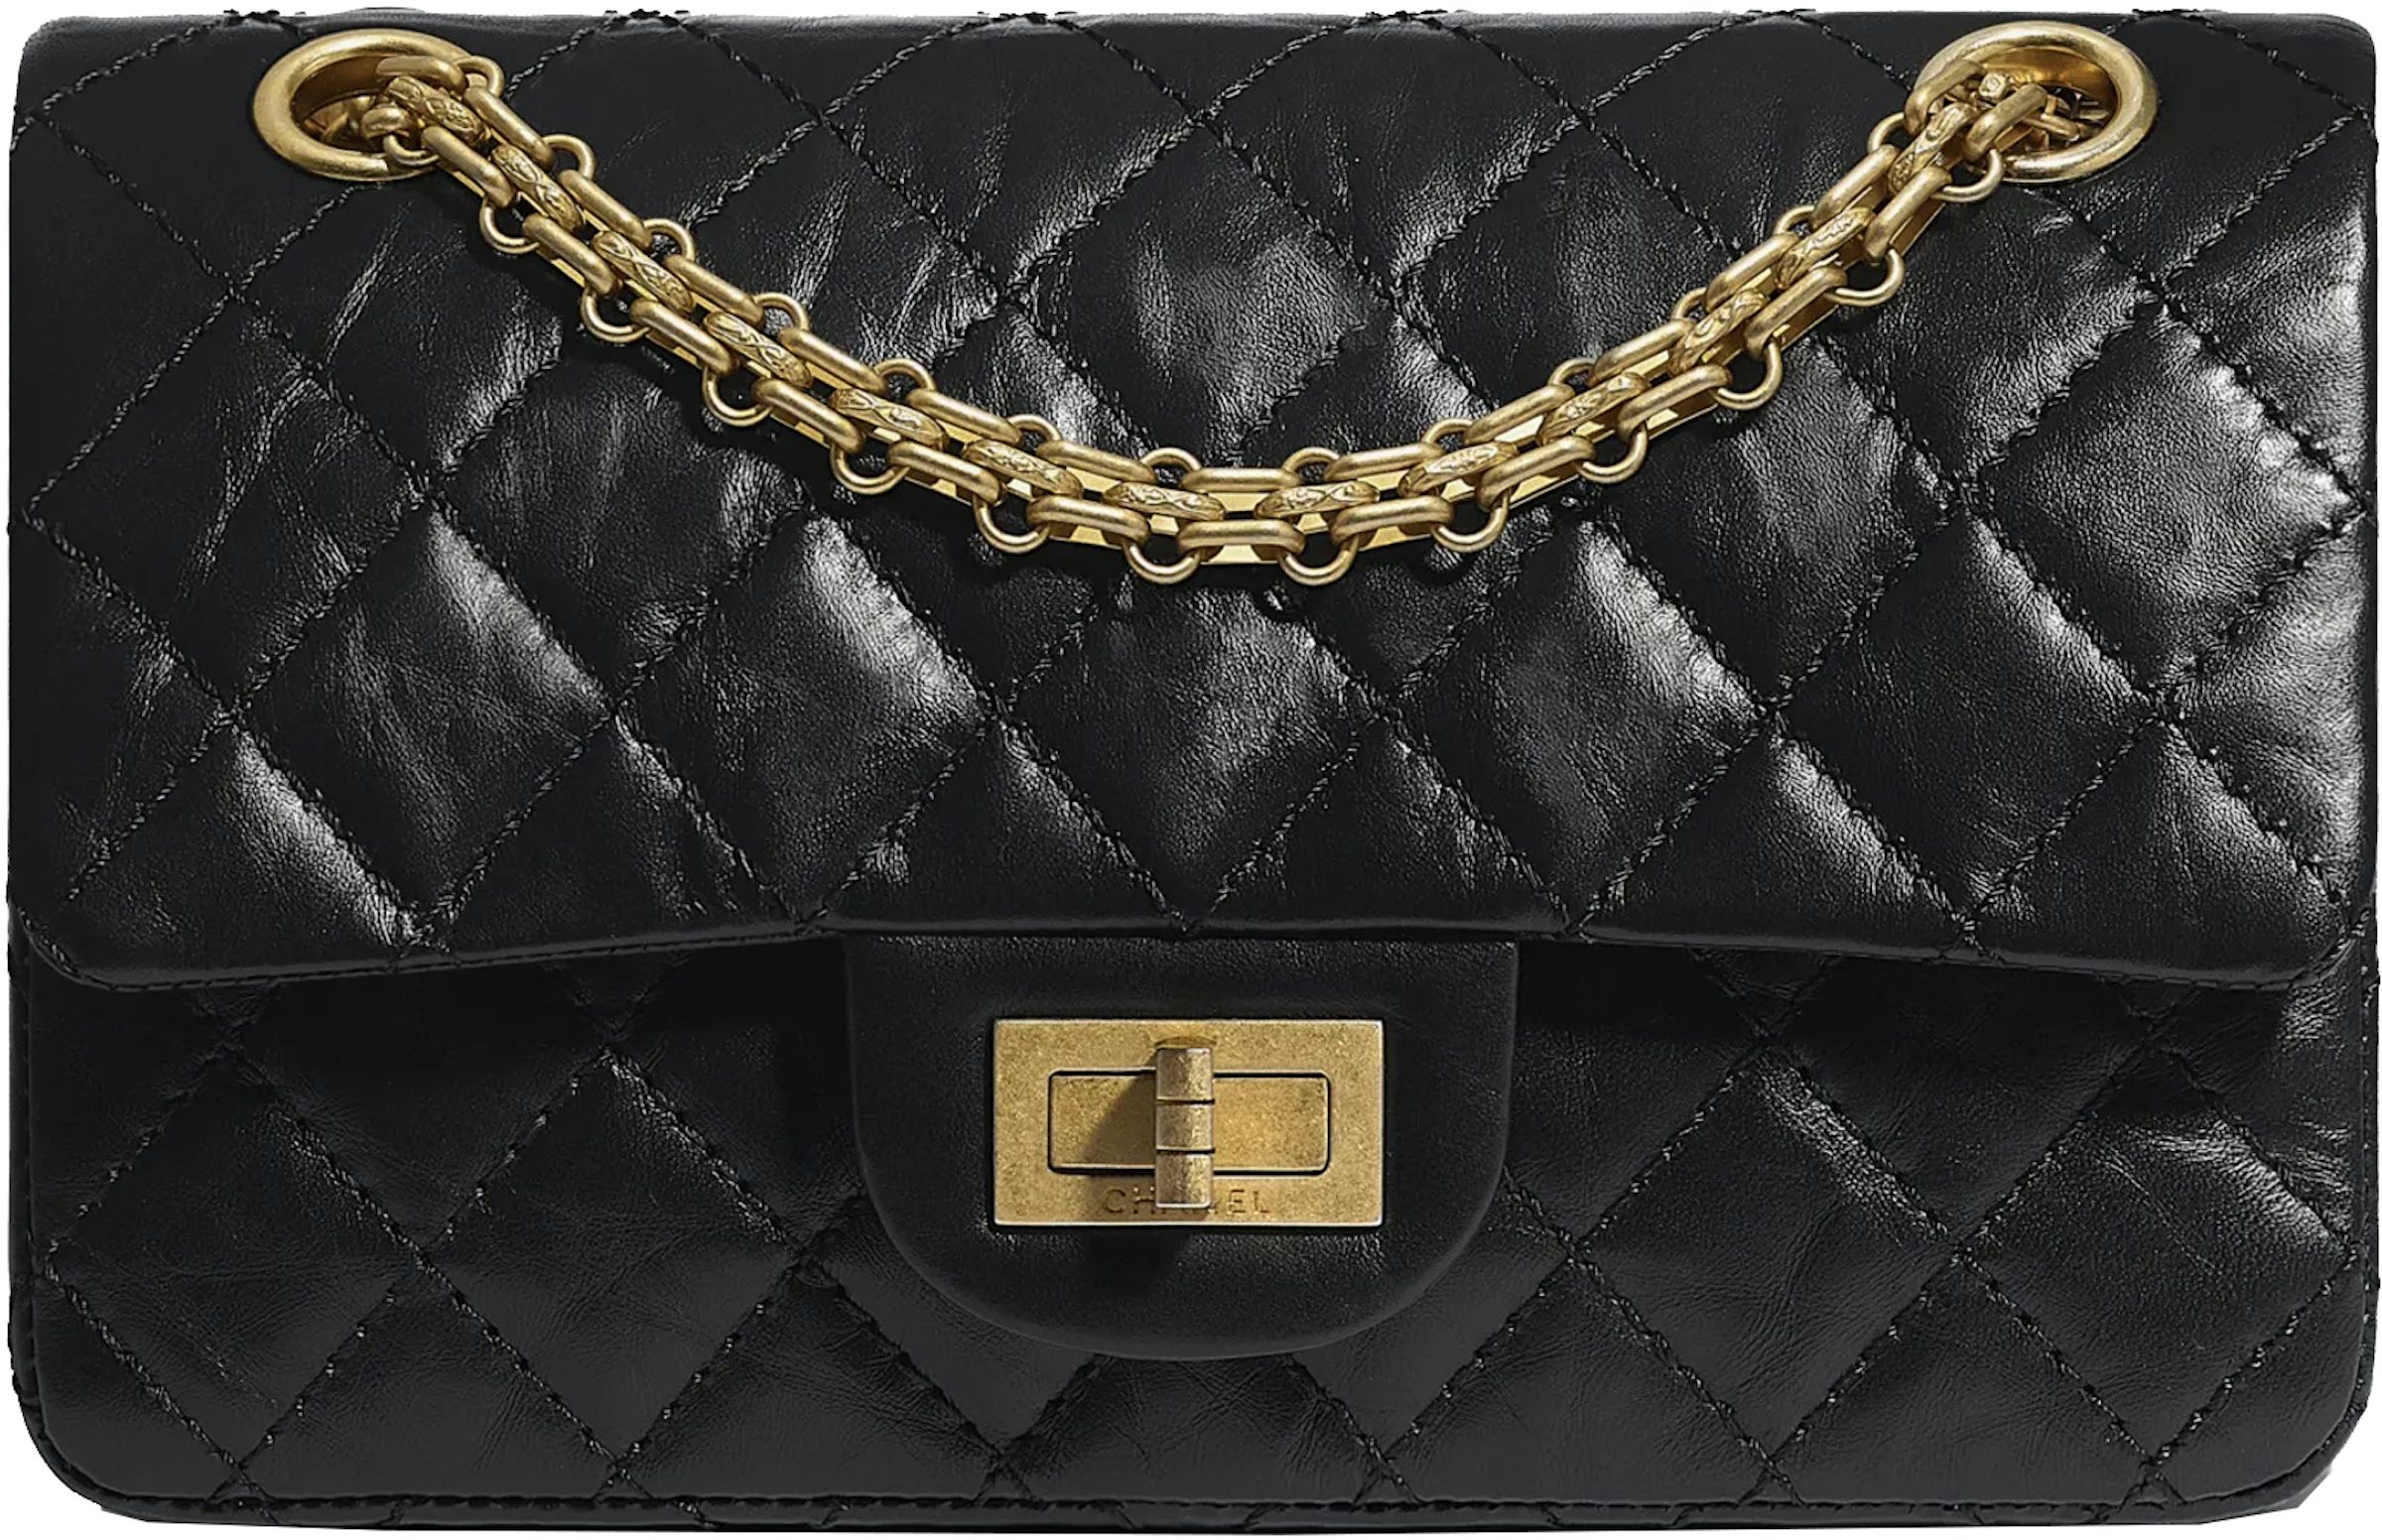 Chanel Chanel 6 inch Black Quilted Leather Shoulder Mini 2.55 Flap